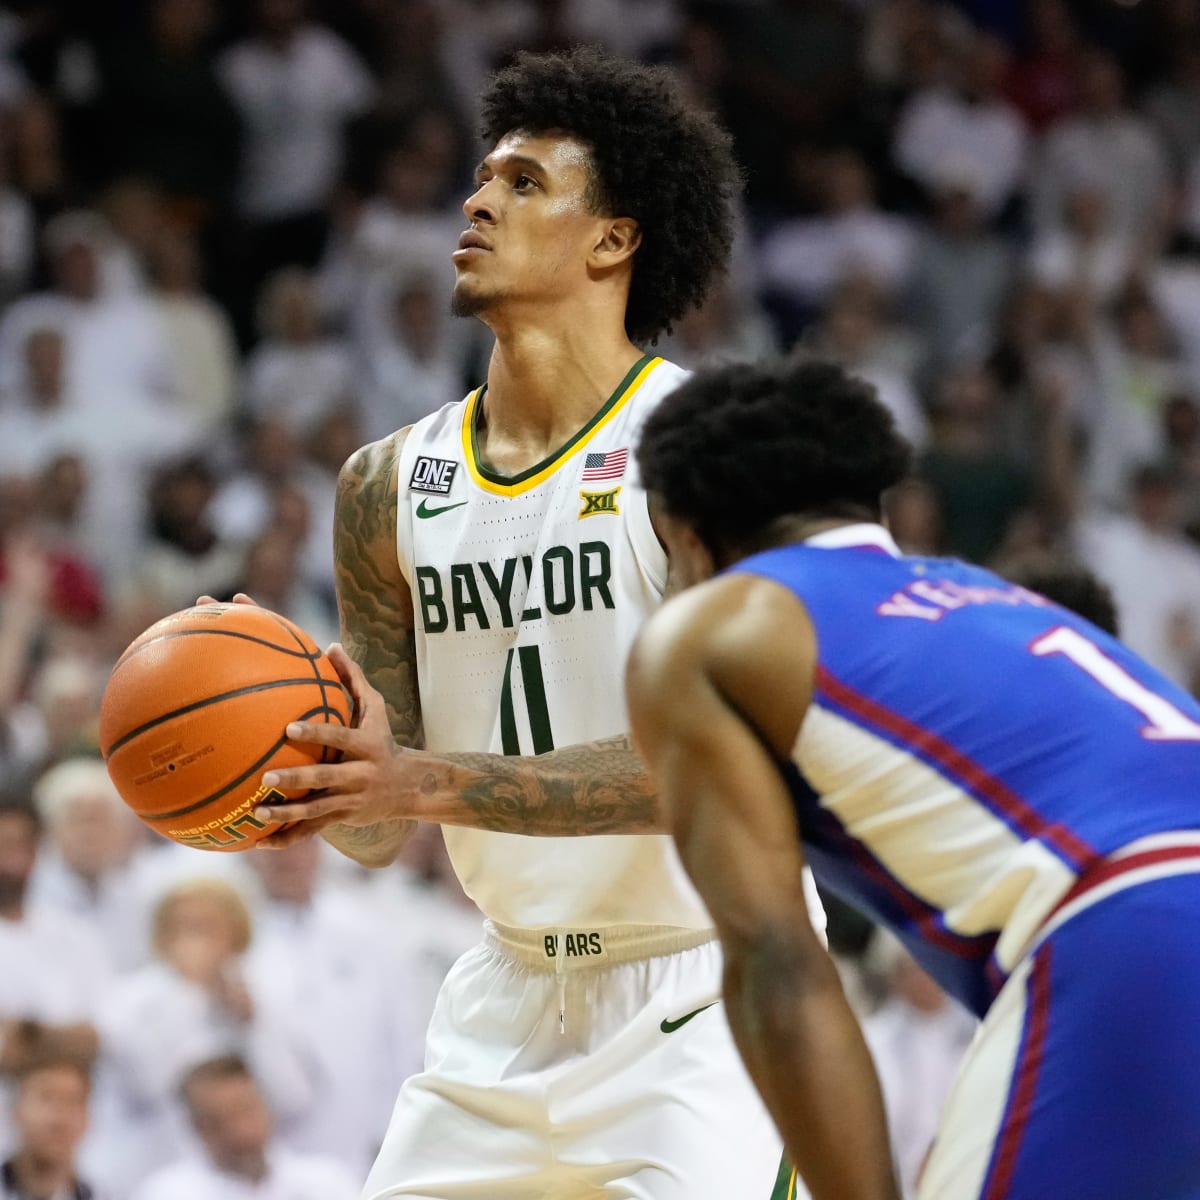 Arkansas at Baylor Free Live Stream College Basketball Online - How to Watch and Stream Major League and College Sports